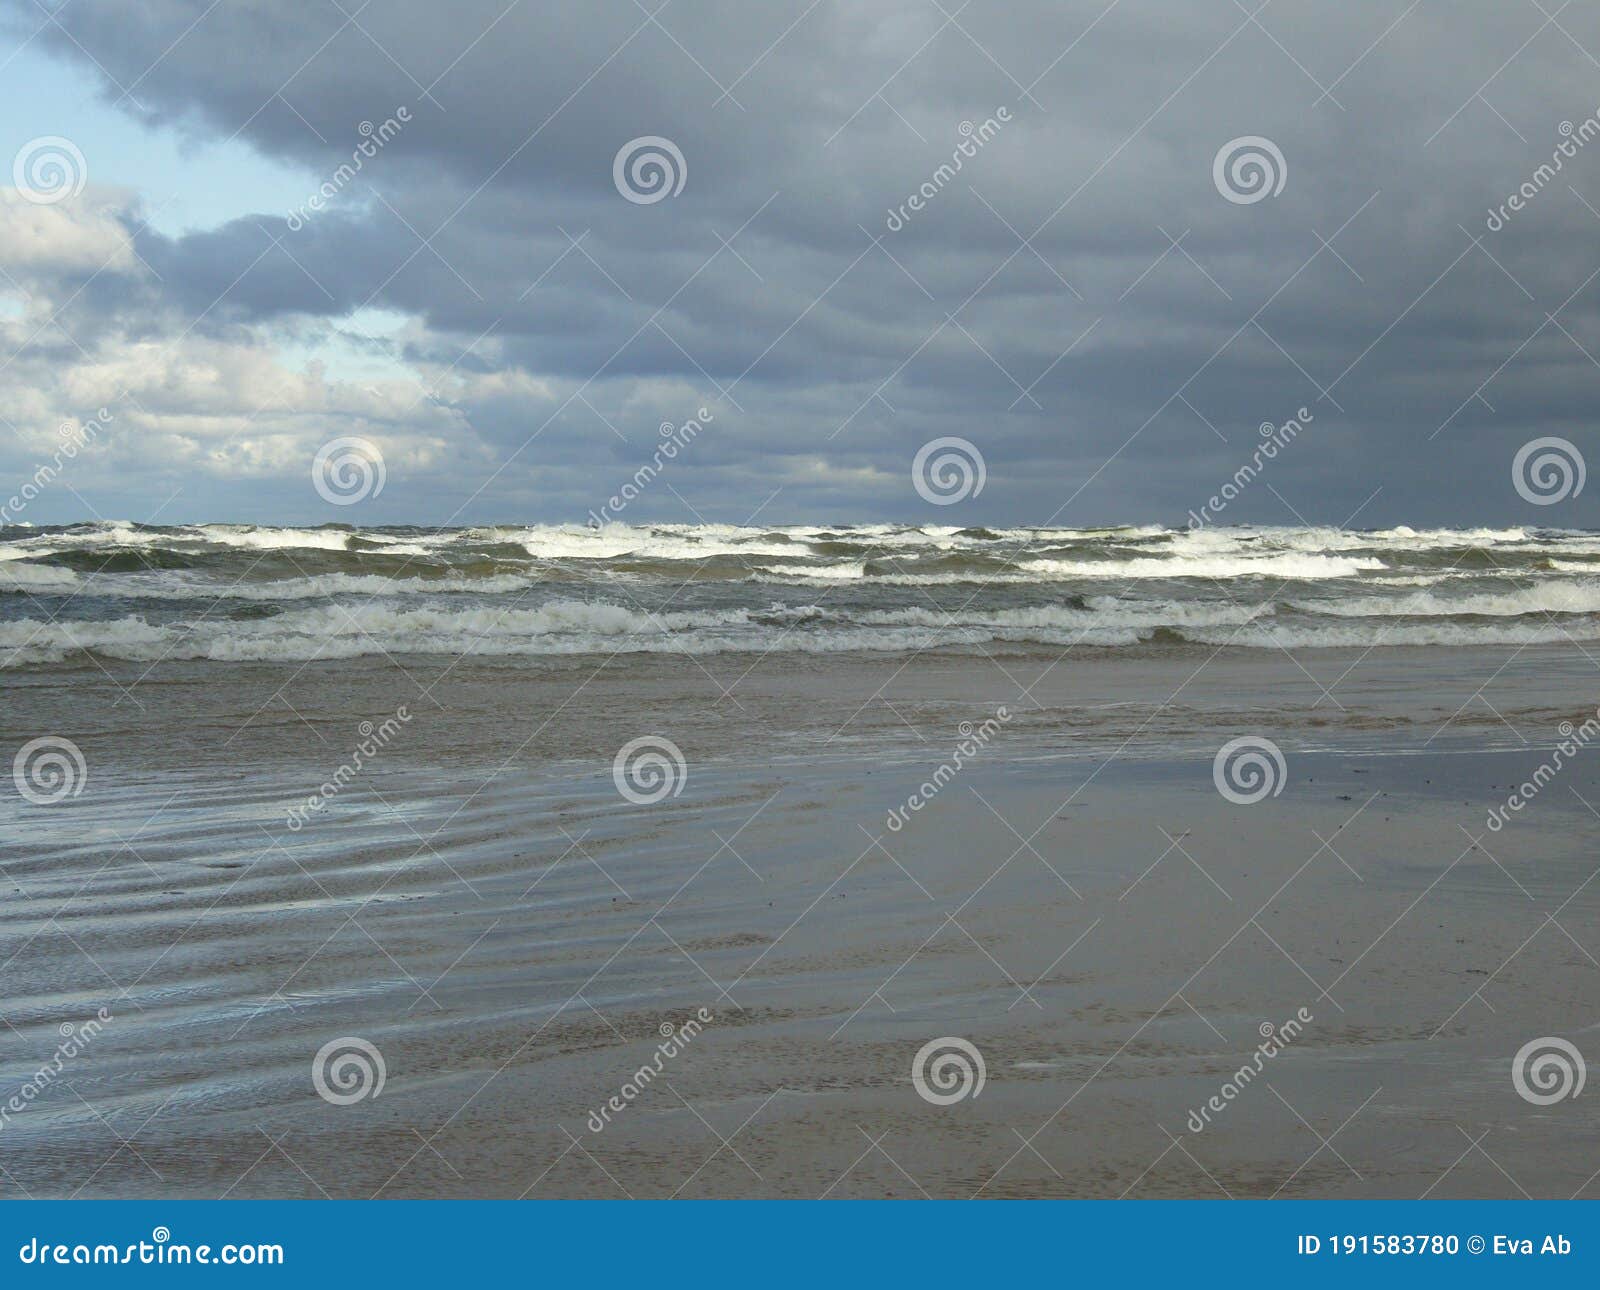 baltic sea in the storm with grey color gamut